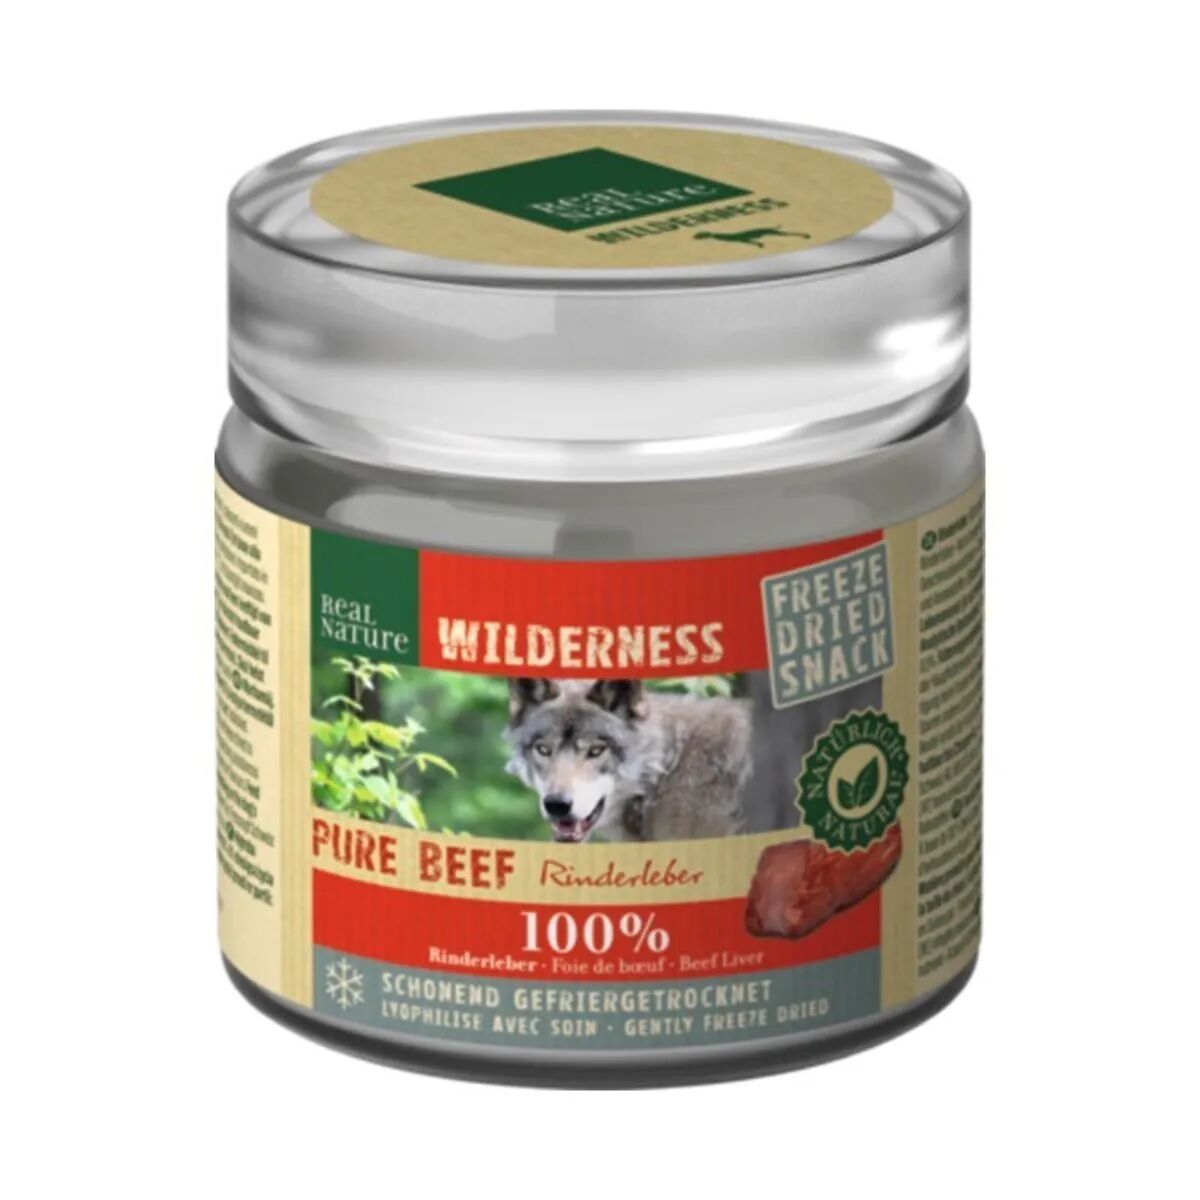 REAL NATURE Wilderness Snack Dog Freeze Dried 50G MANZO